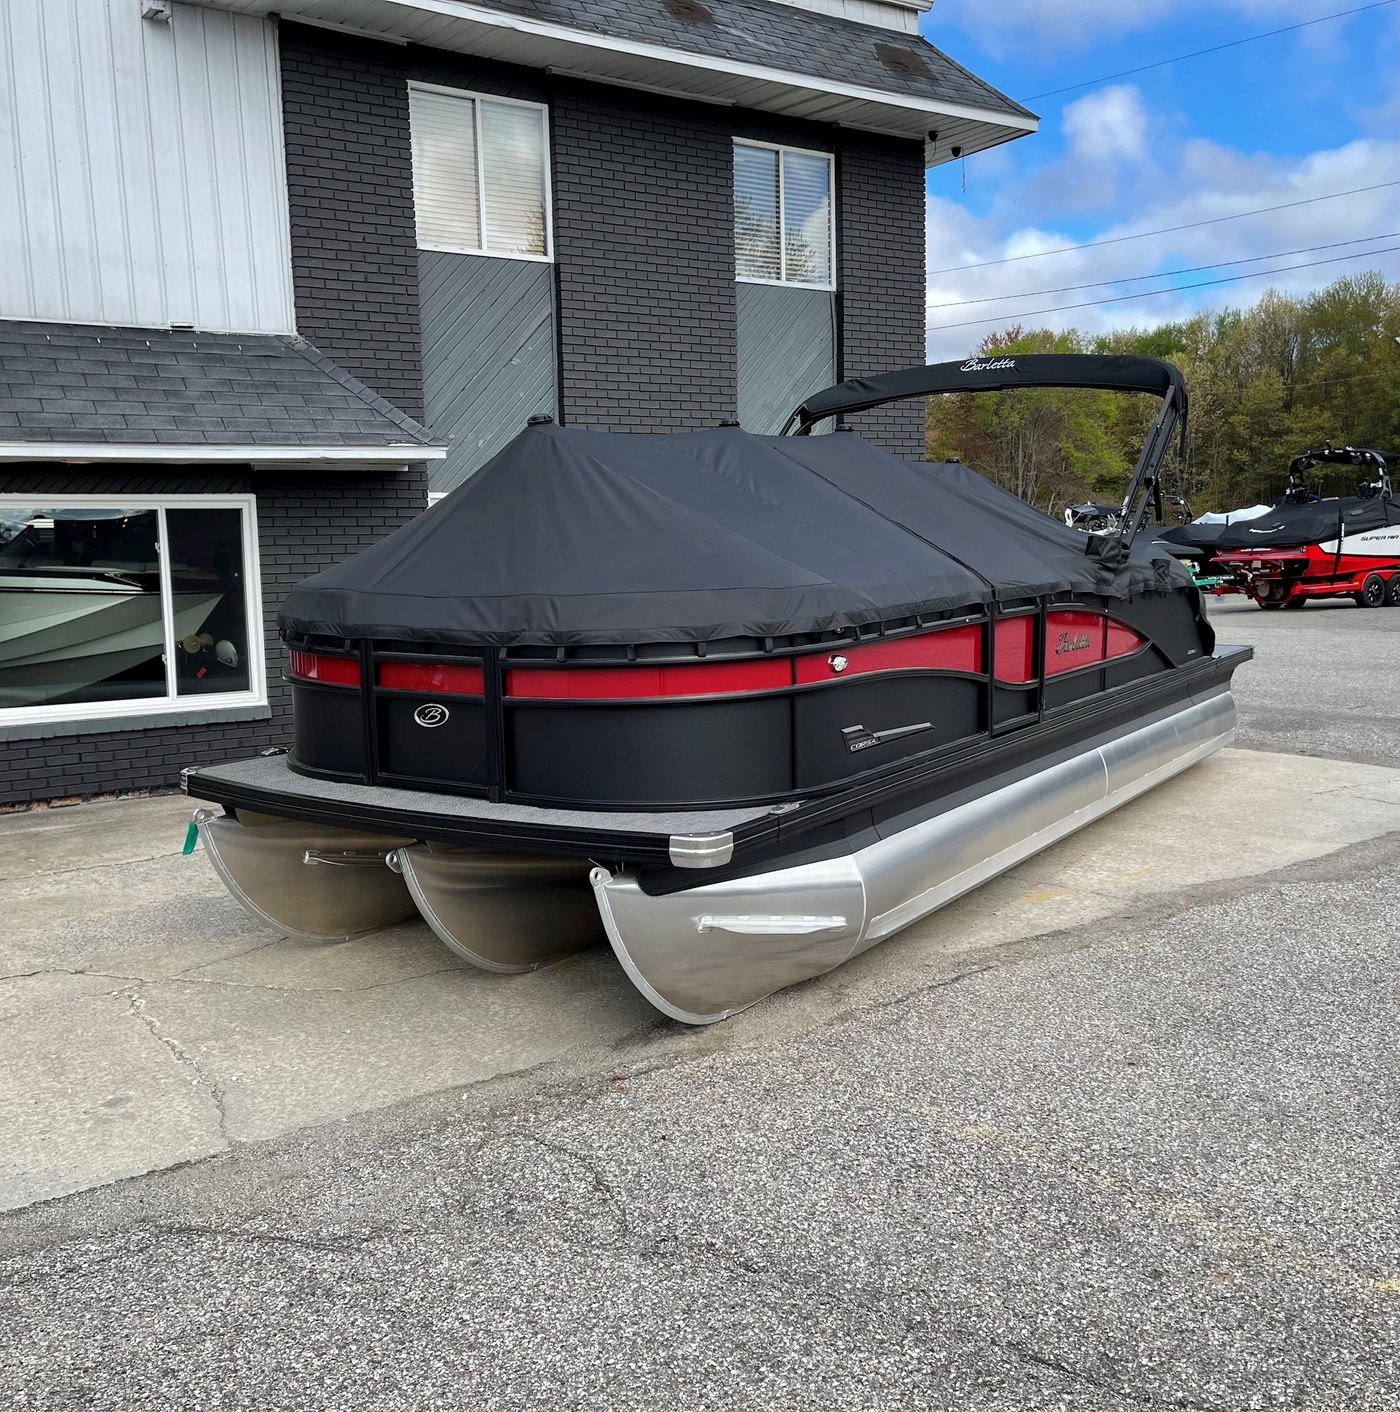 Pontoon Boat Covers: Which is Best for You?